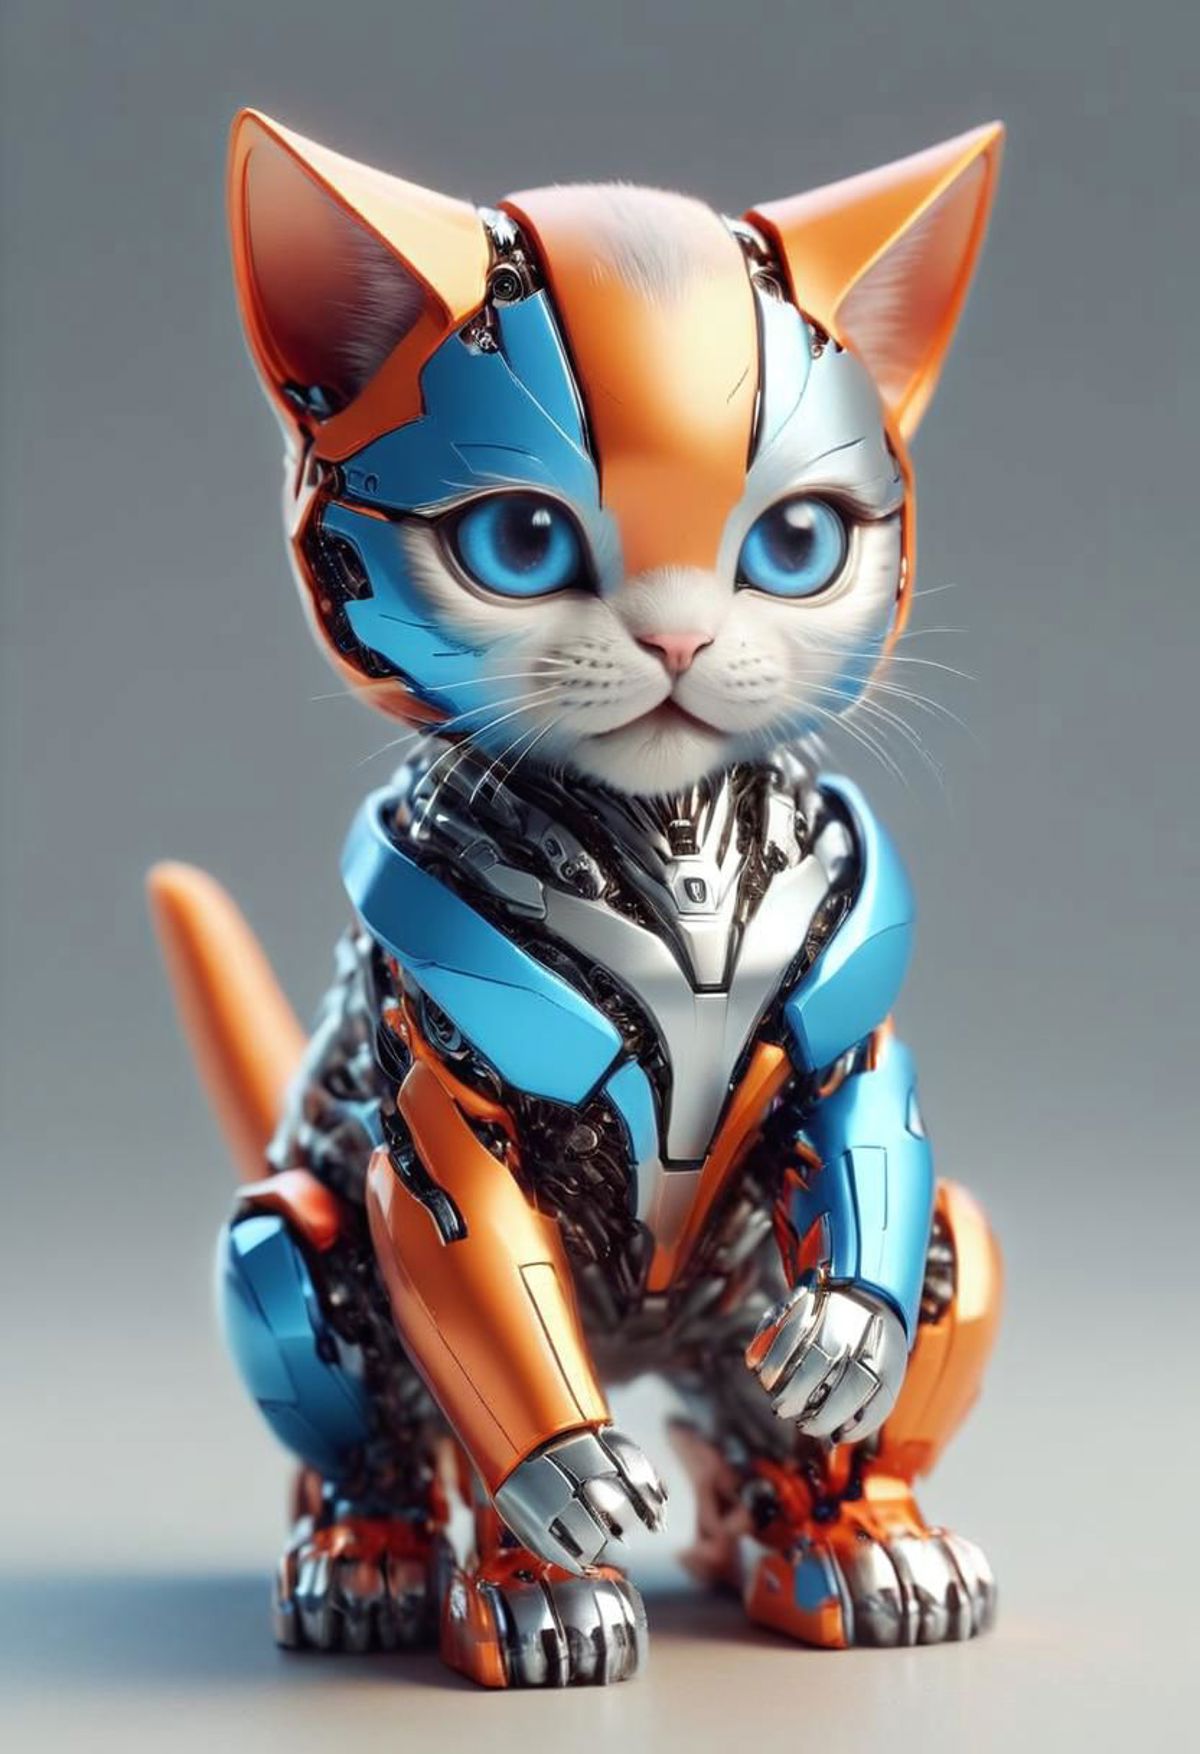 A cute kitten with blue eyes and a robotic body.